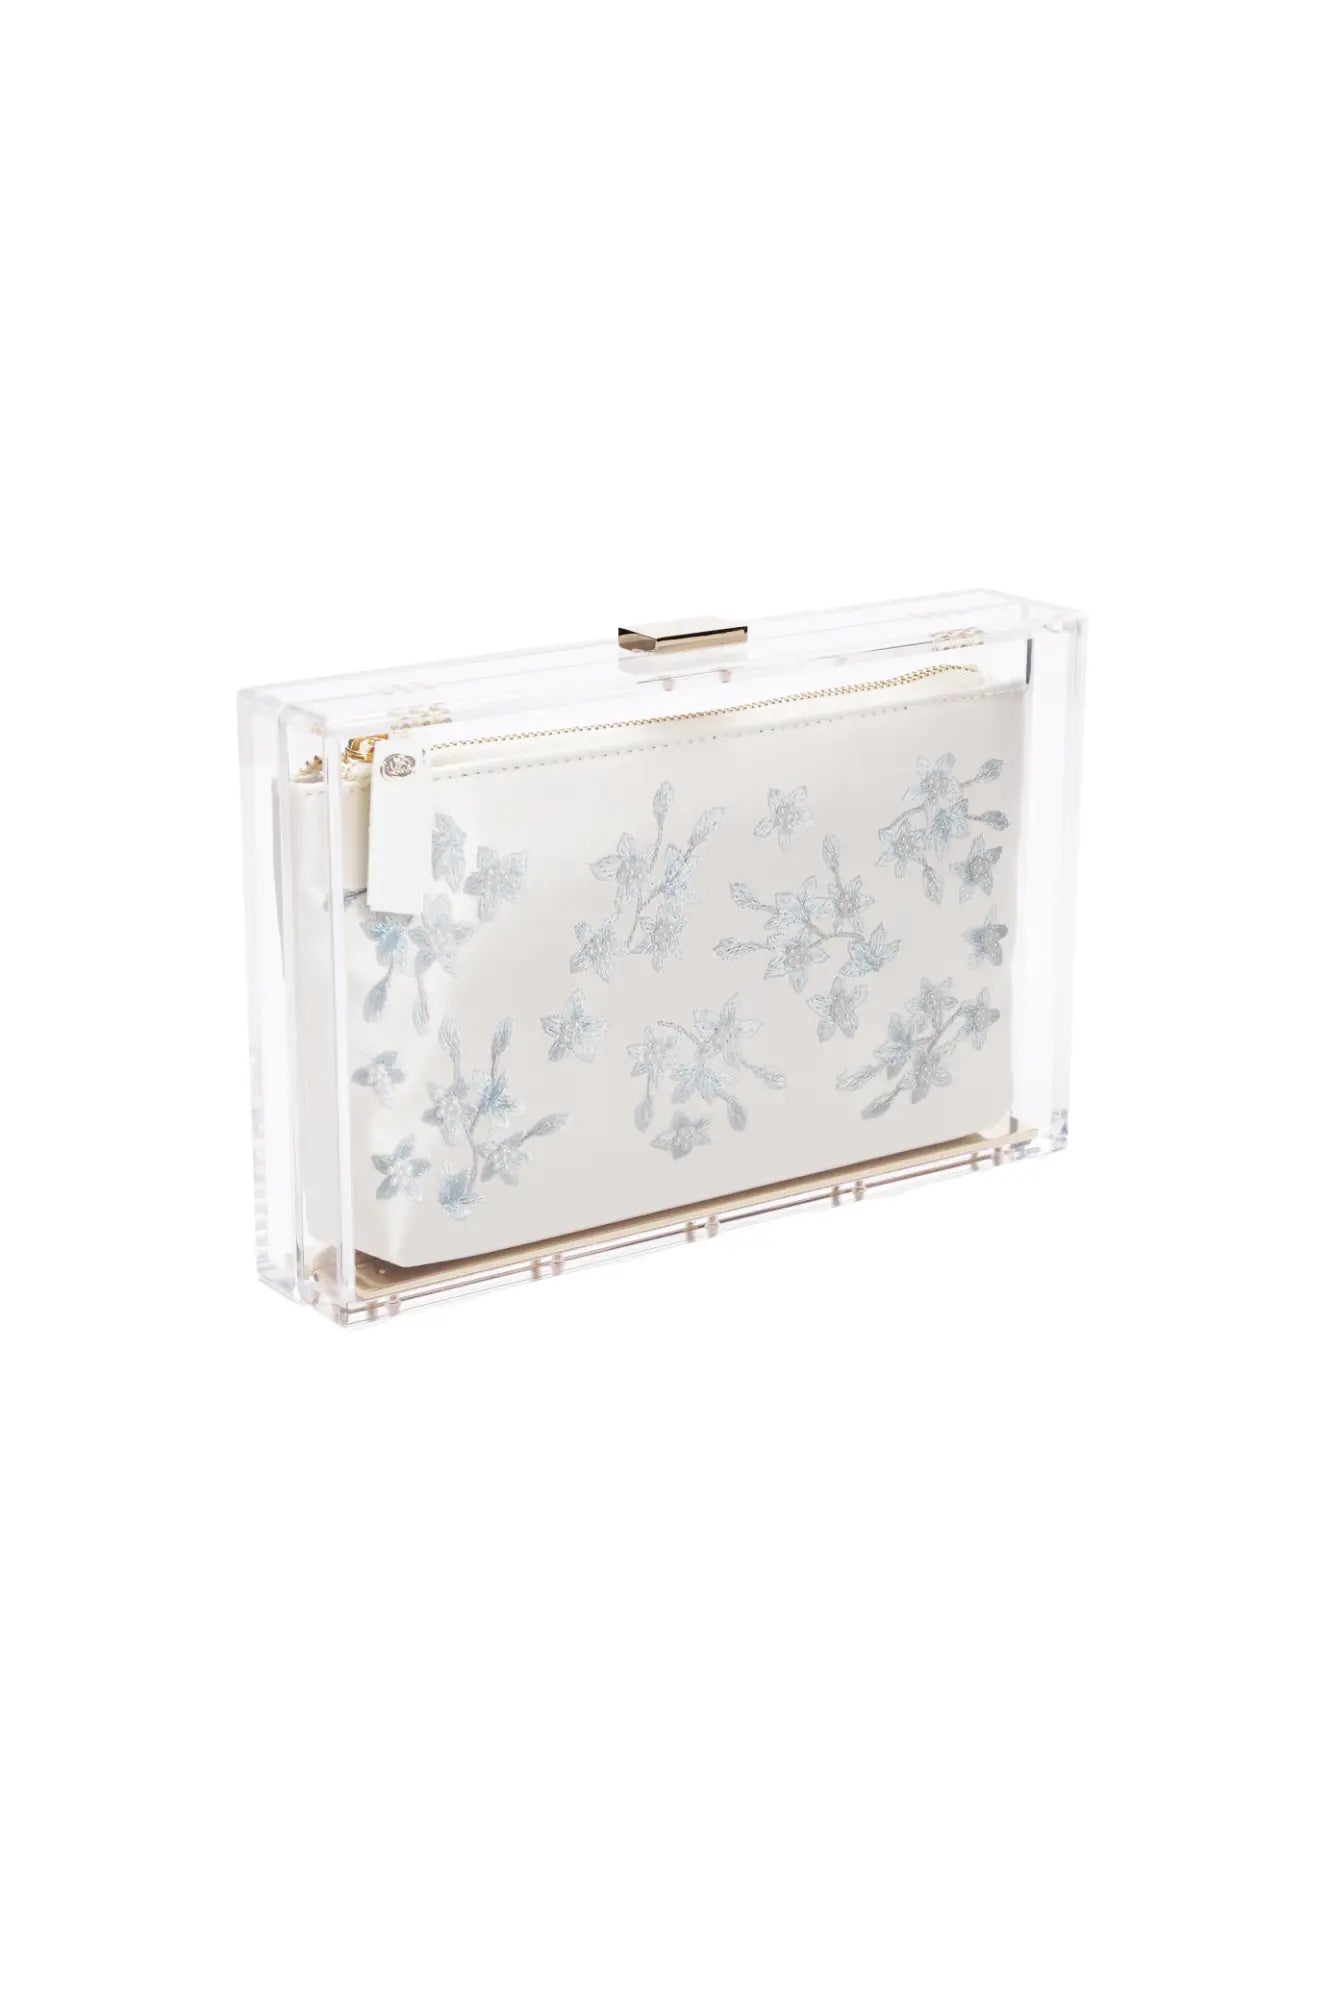 Italian Mia Acrylic Clutch with Ivory Pouch Blue Flowers from The Bella Rosa Collection.